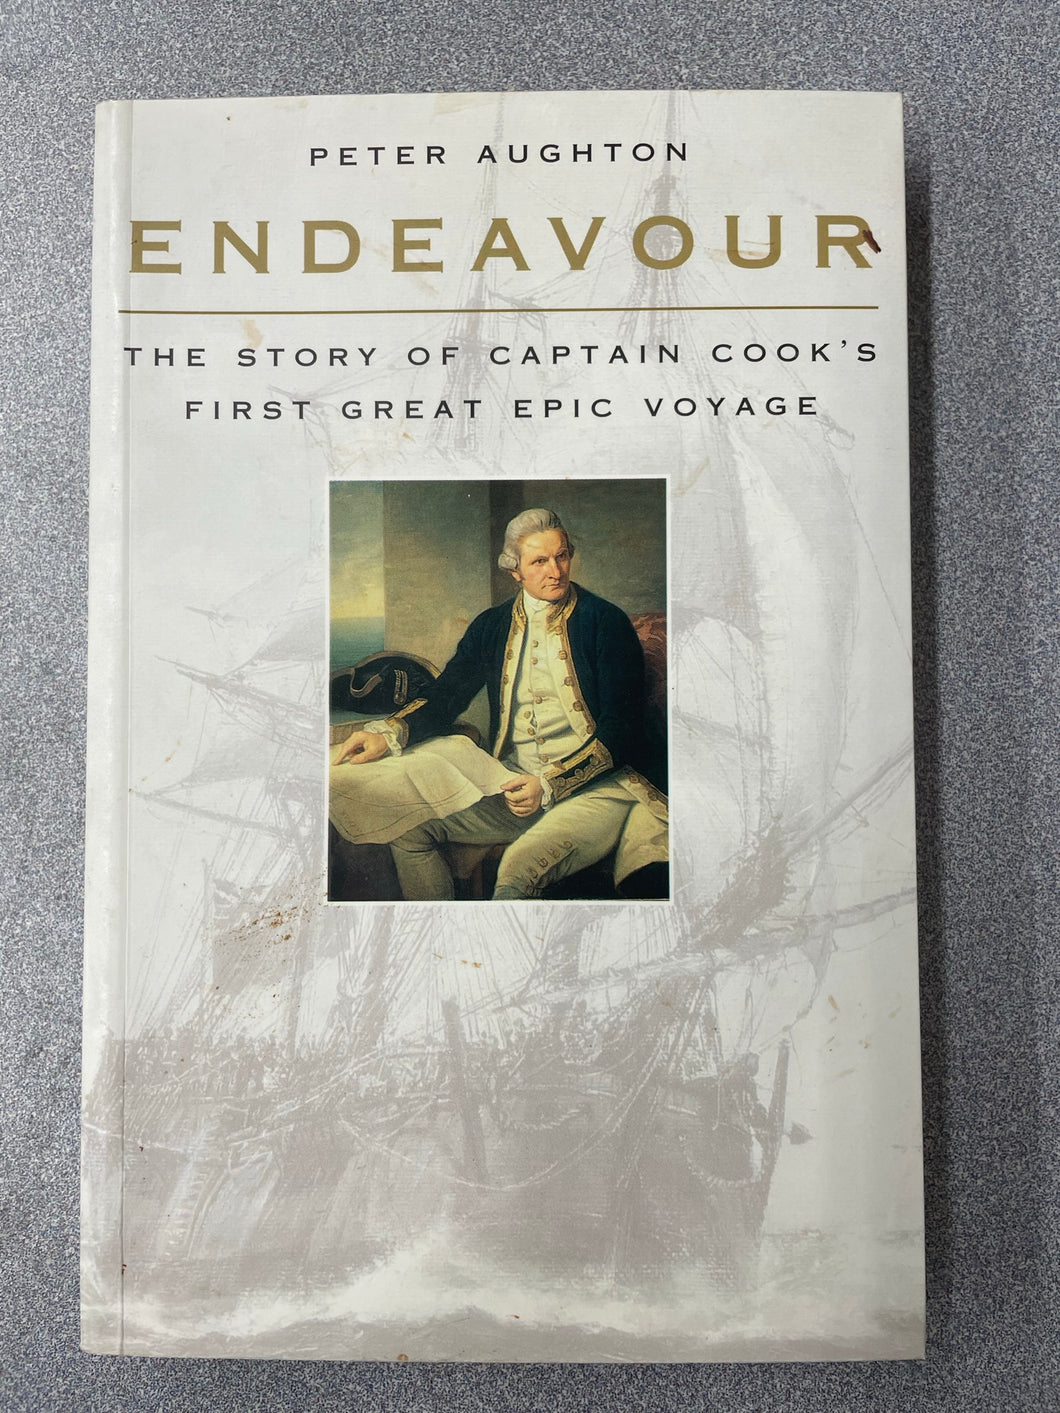 Endeavour: The Story of Captain Cook's First Great Epic Voyage, Aughton, Peter [1999] AN 8/23